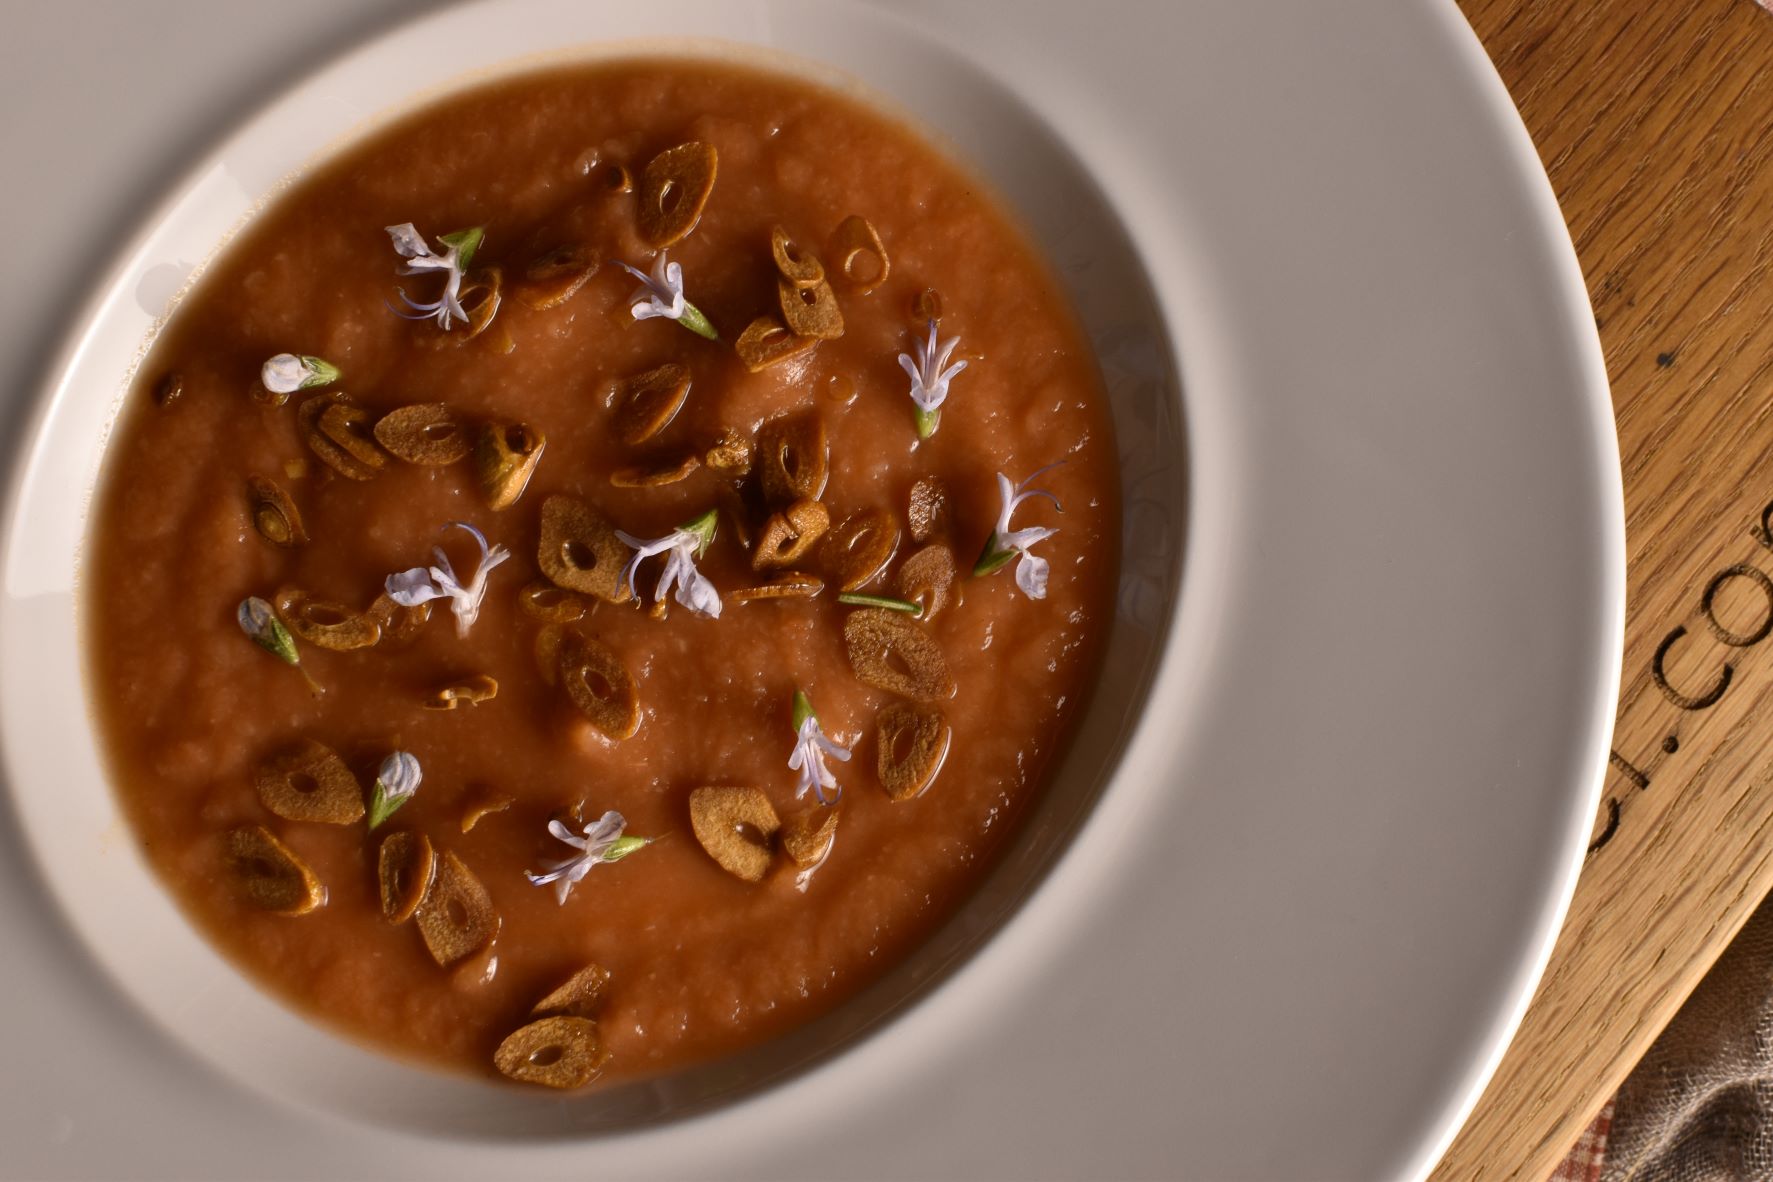 Cold tomato soup with “burnt garlic” and rosemary flowers